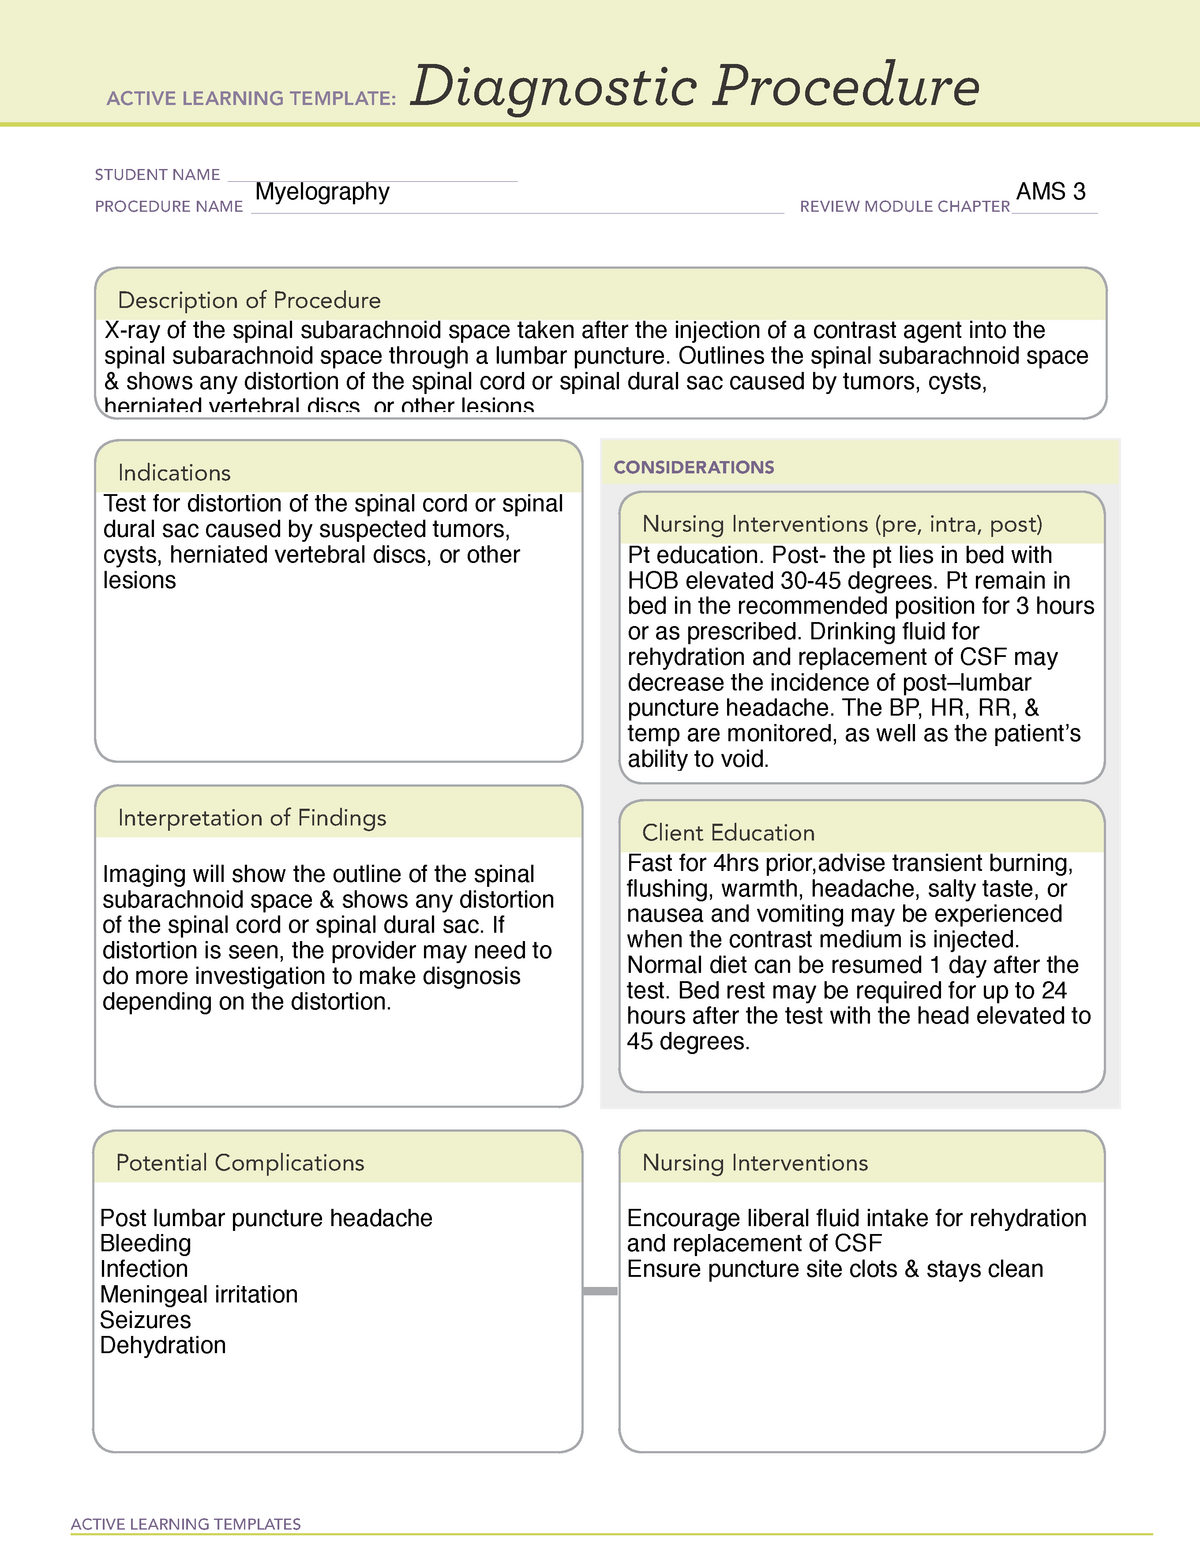 ATI Diagnostic Procedure Template Myelography ACTIVE LEARNING